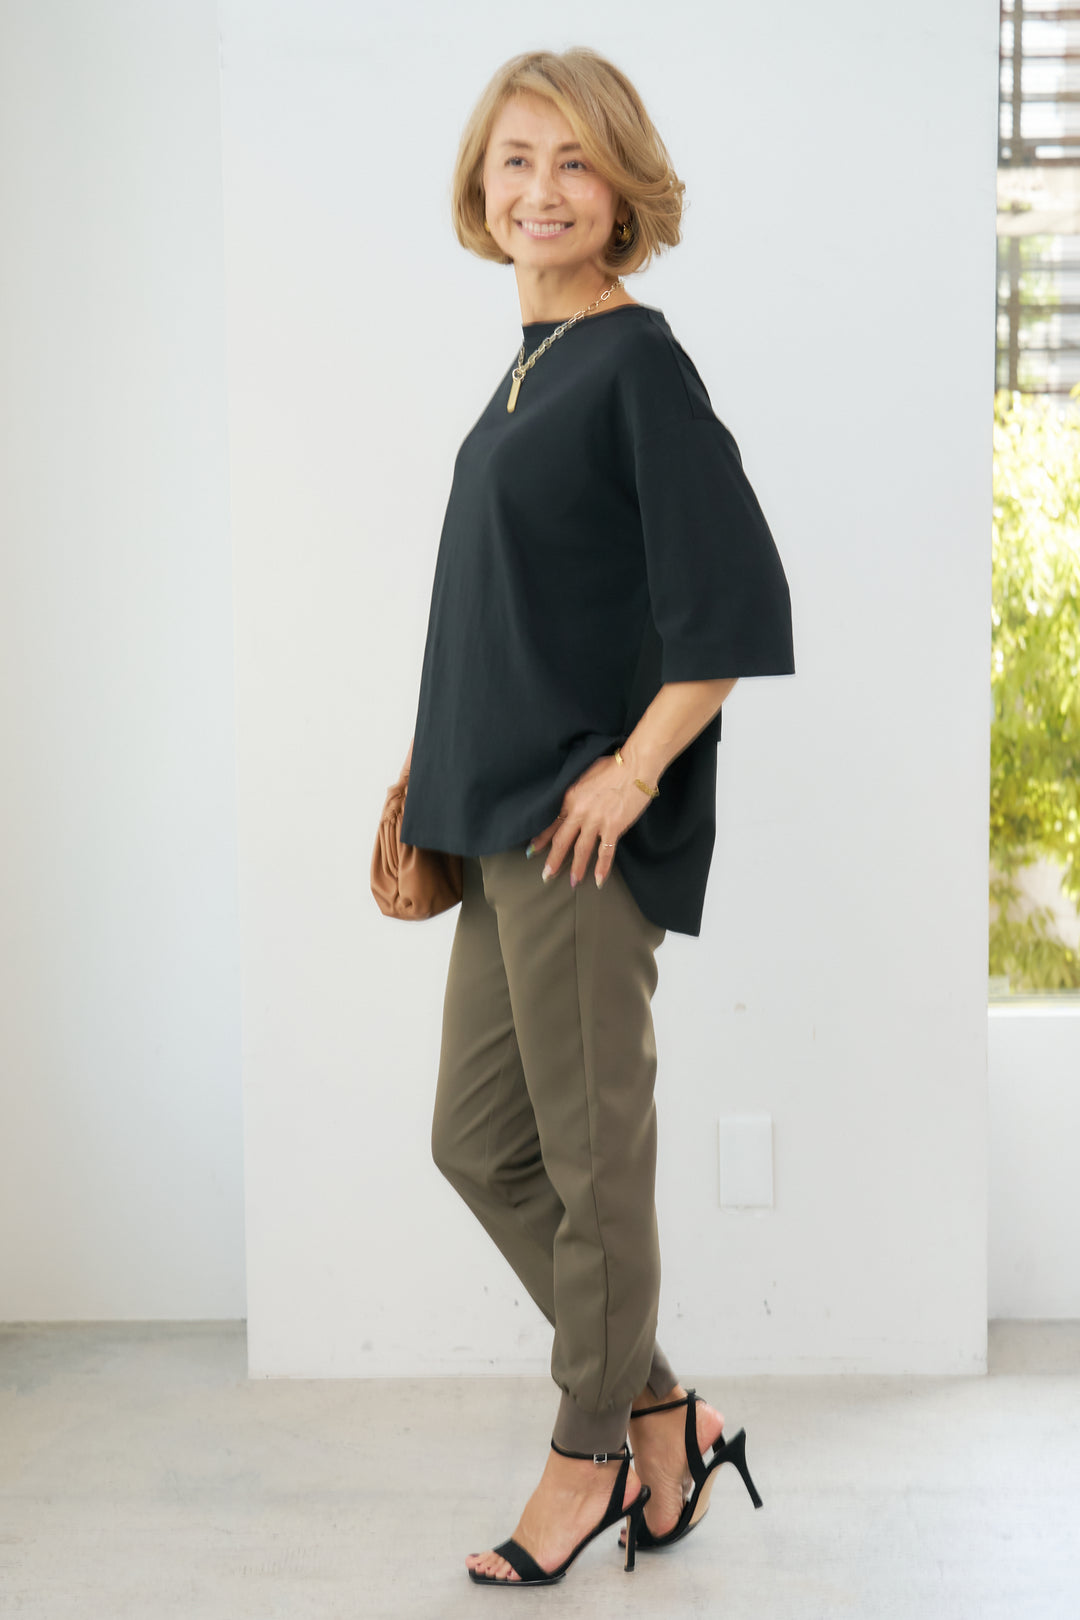 [SET] [Cool to the touch] Compact smooth back frill pullover + double georgette hem slit jogger pants (2 sets)